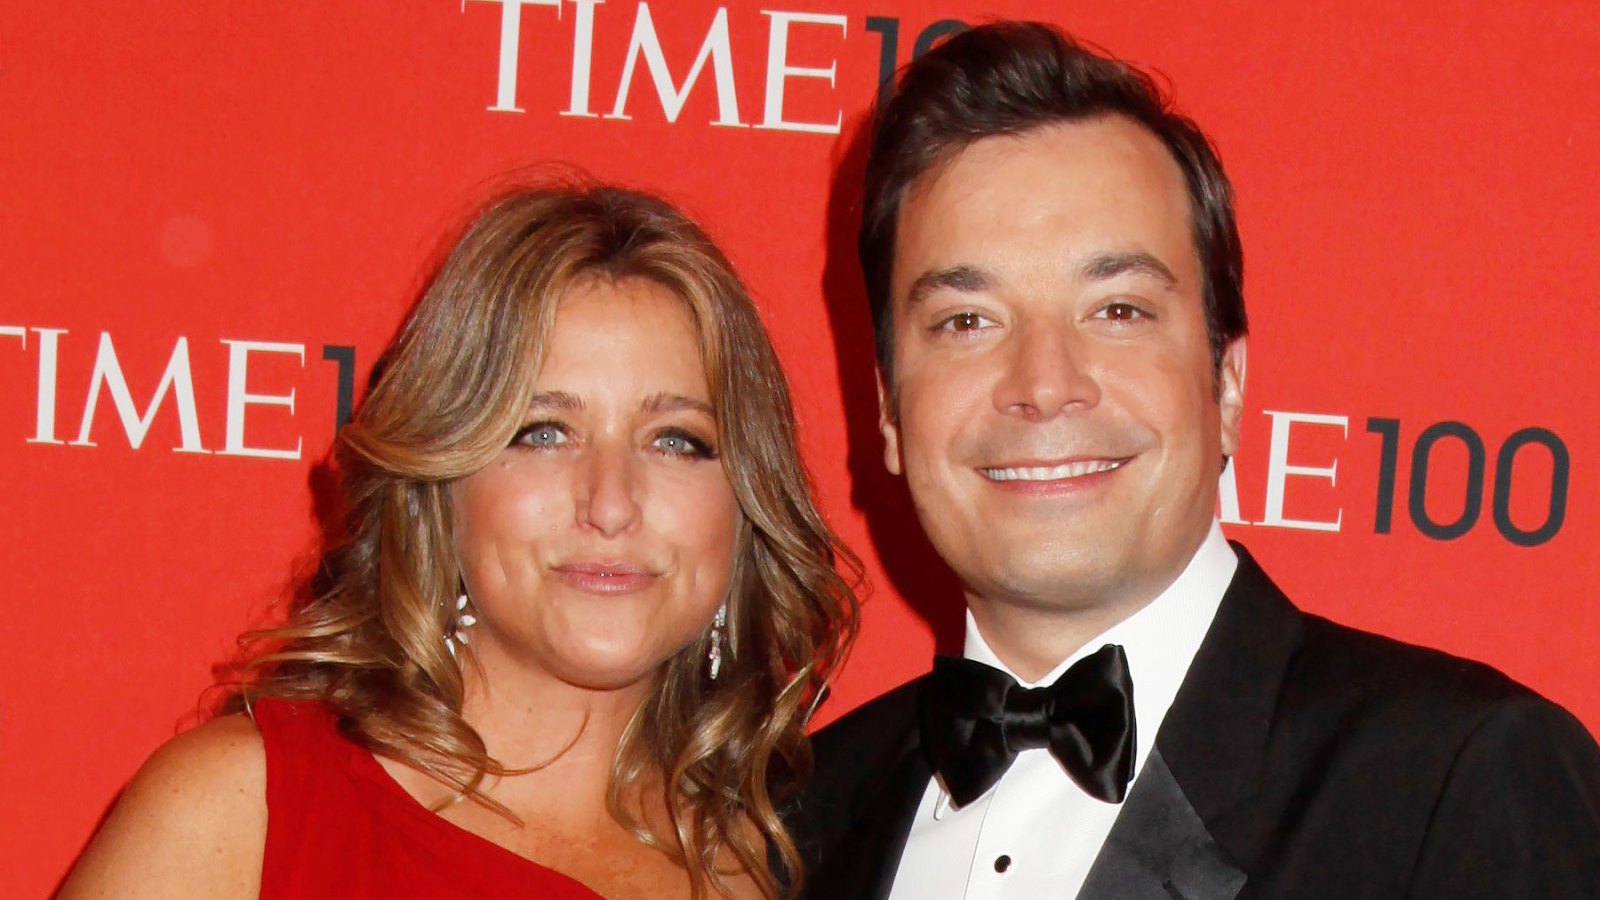 Jimmy Fallon and Wife Nancy Juvonen Recall the ‘Magic’ of Their First Meeting More Than 10 Years After They Wed